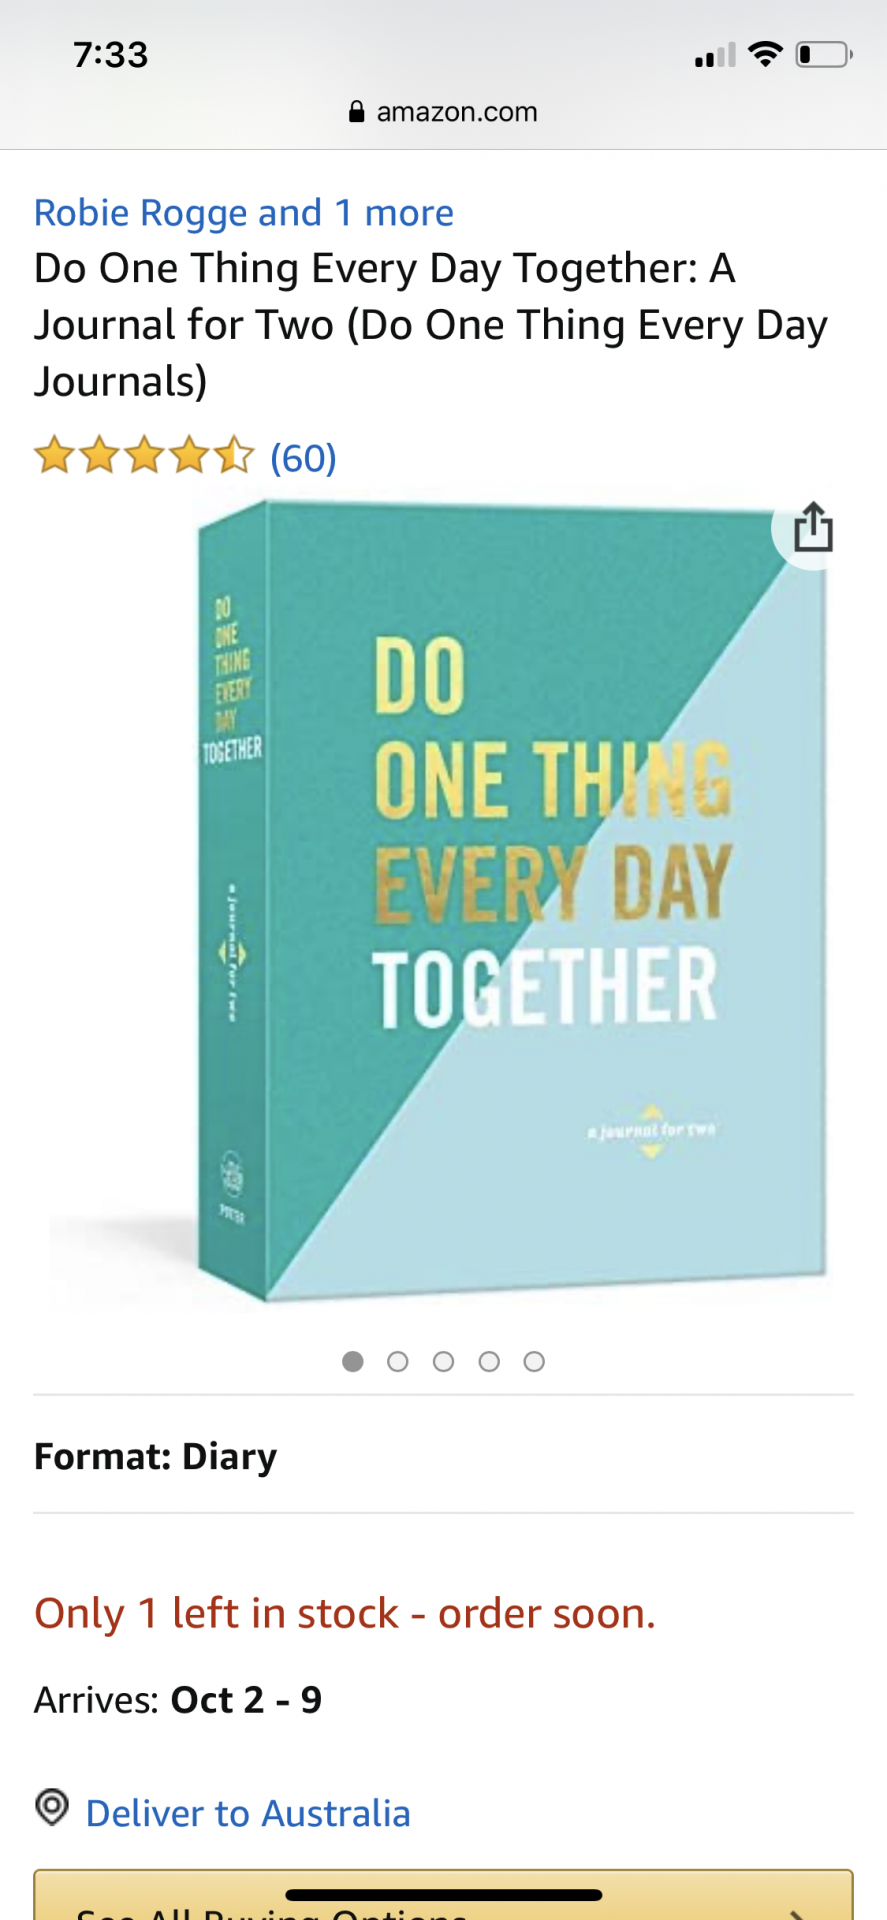 Do One Thing Every Day Together: A Journal for Two (Do One Thing Every Day Journals)